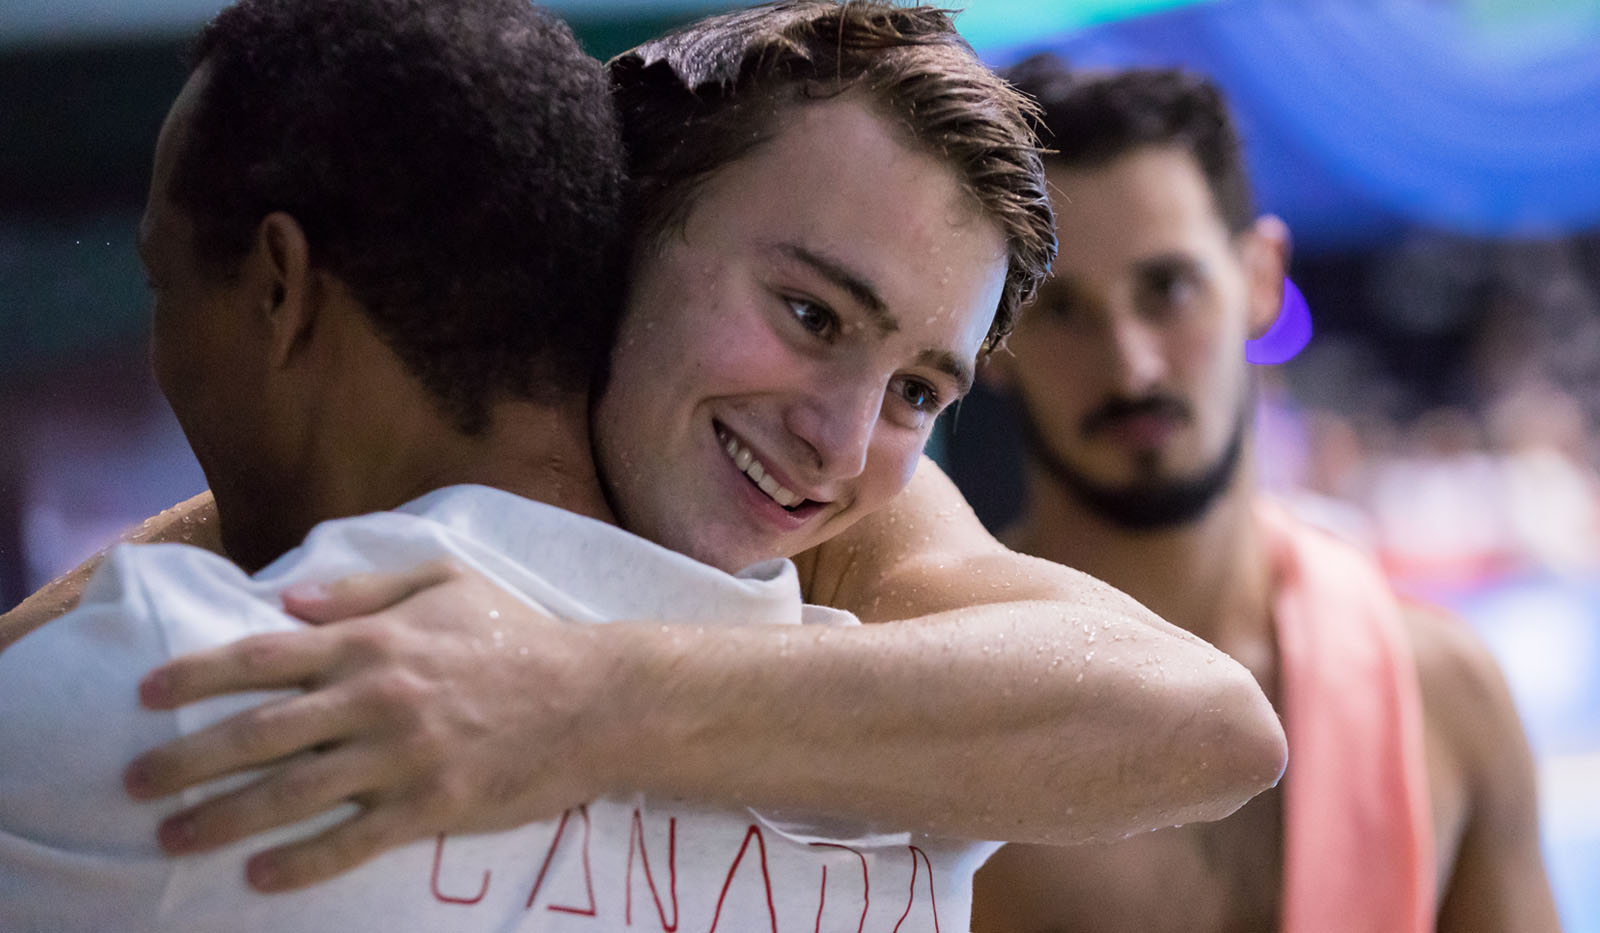 Gwangju: things you need to know about the Canadian diving team